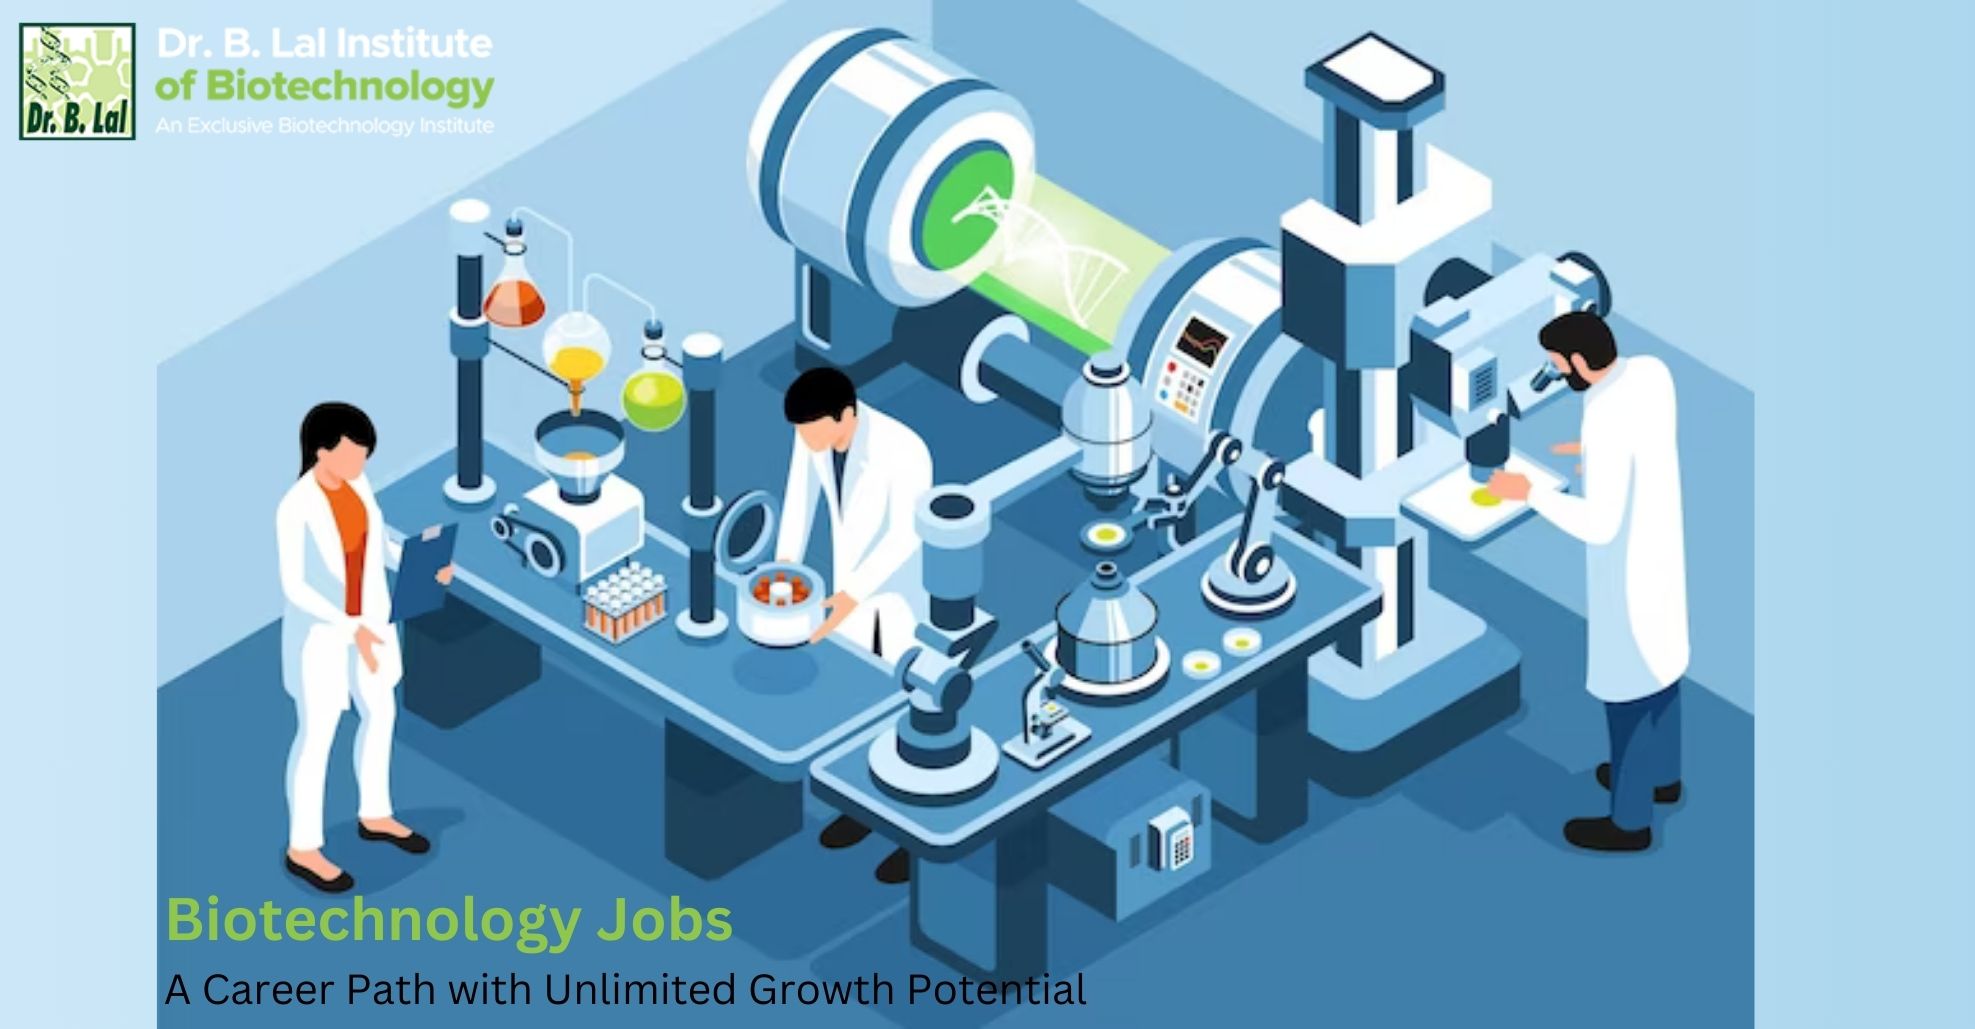 Biotechnology Jobs: A Career Path with Unlimited Growth Potential